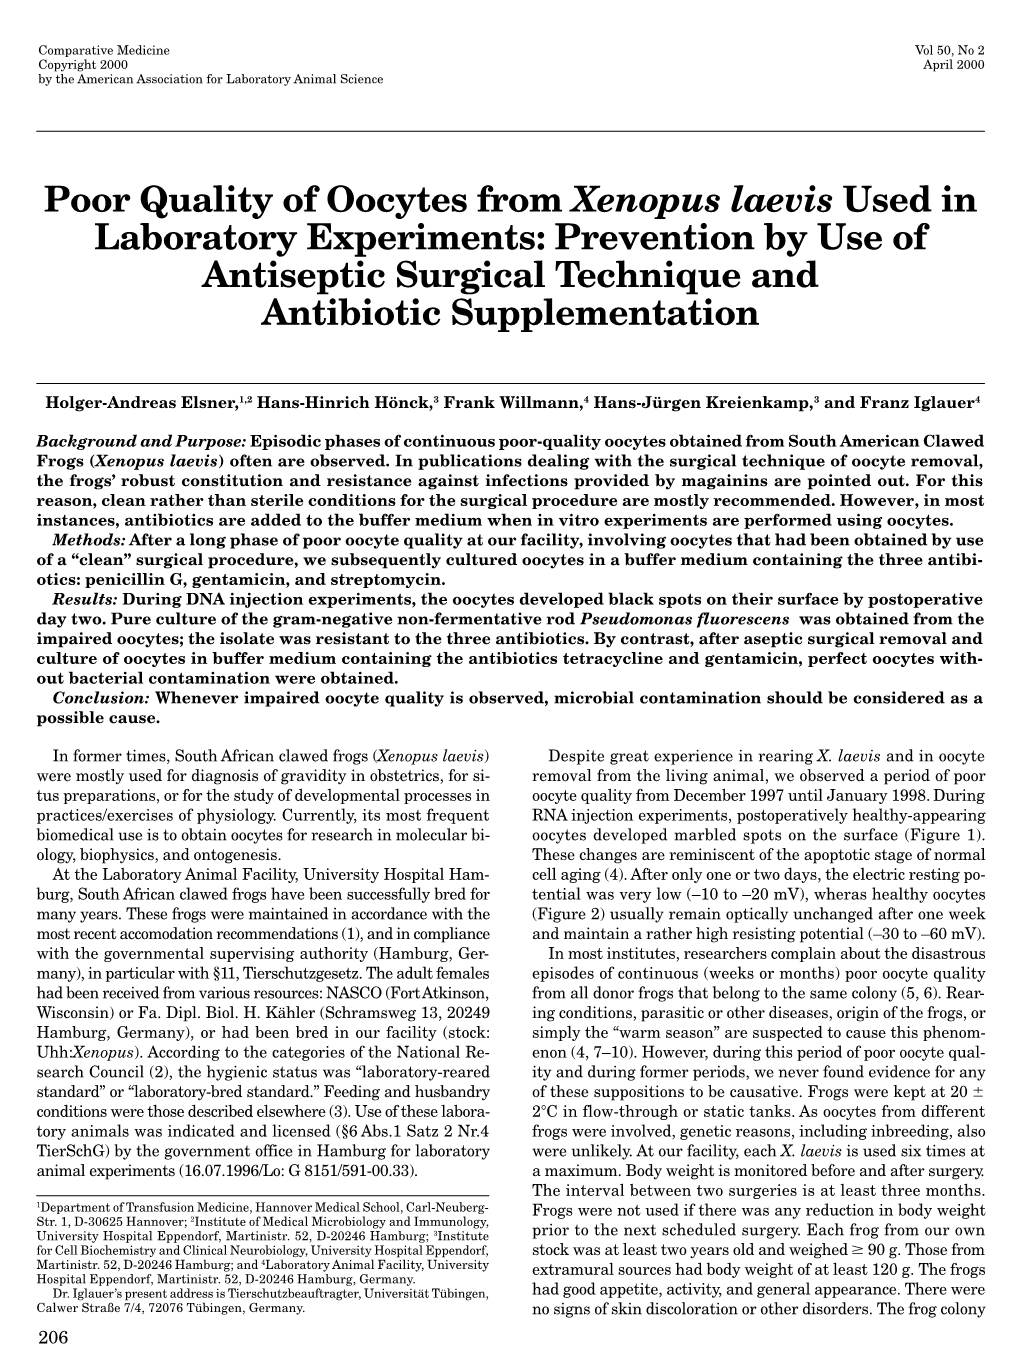 Poor Quality of Oocytes from Xenopus Laevis Used in Laboratory Experiments: Prevention by Use of Antiseptic Surgical Technique and Antibiotic Supplementation